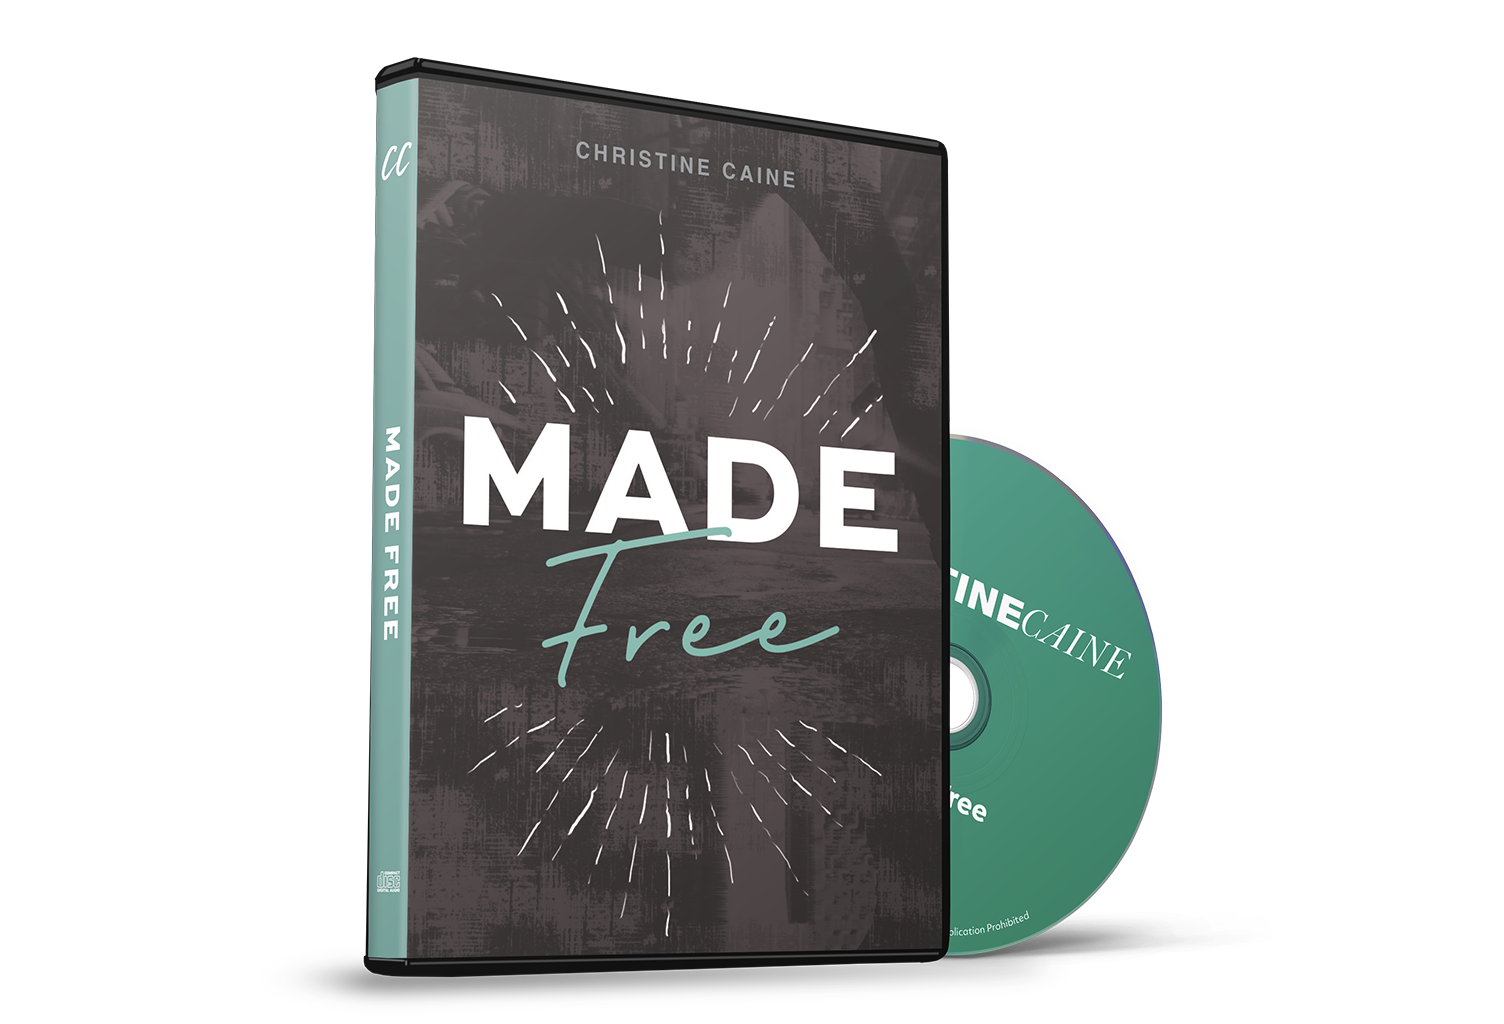 Made Free by Christine Caine from TBN